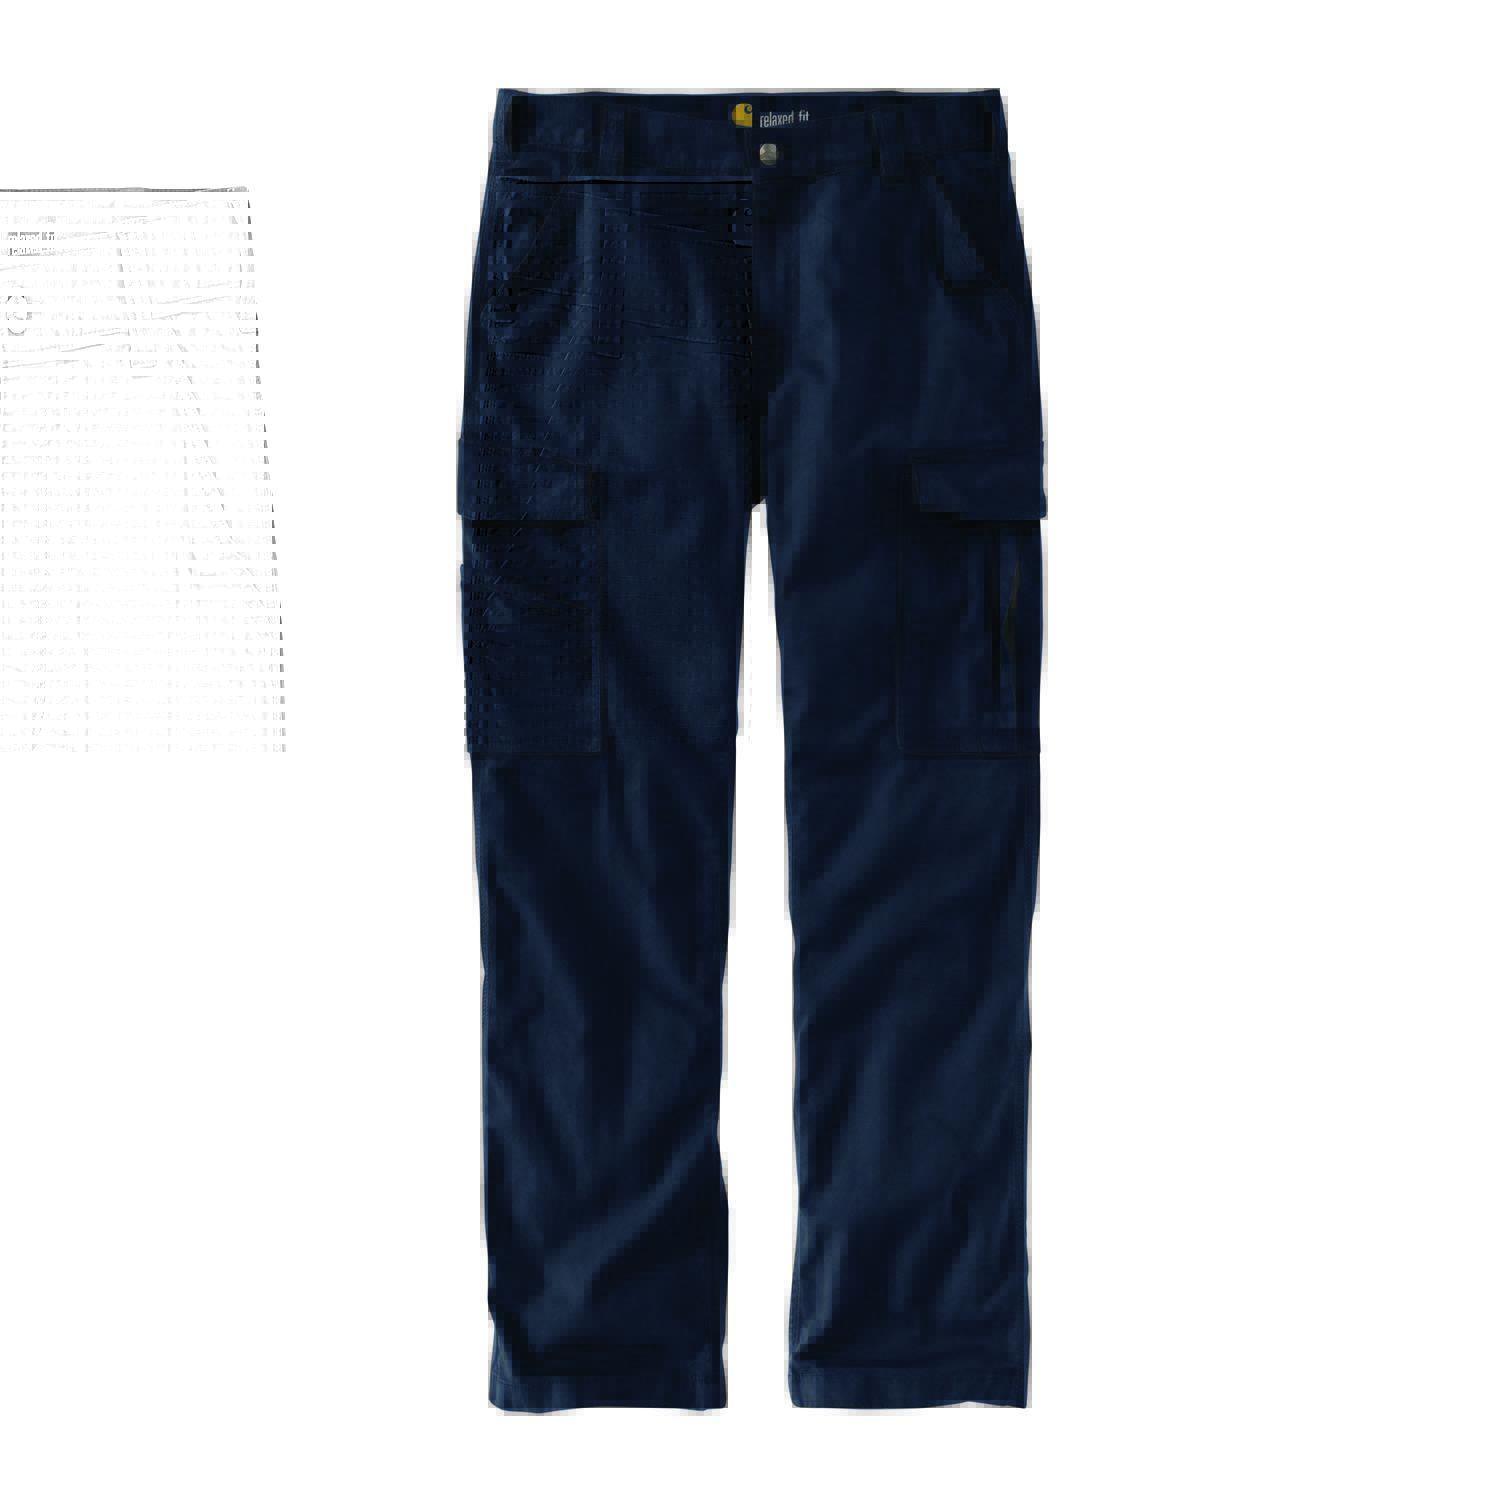 CARHARTT RUGGED FLEX RELAXED FIT CANVAS CARGO WORK PANTS